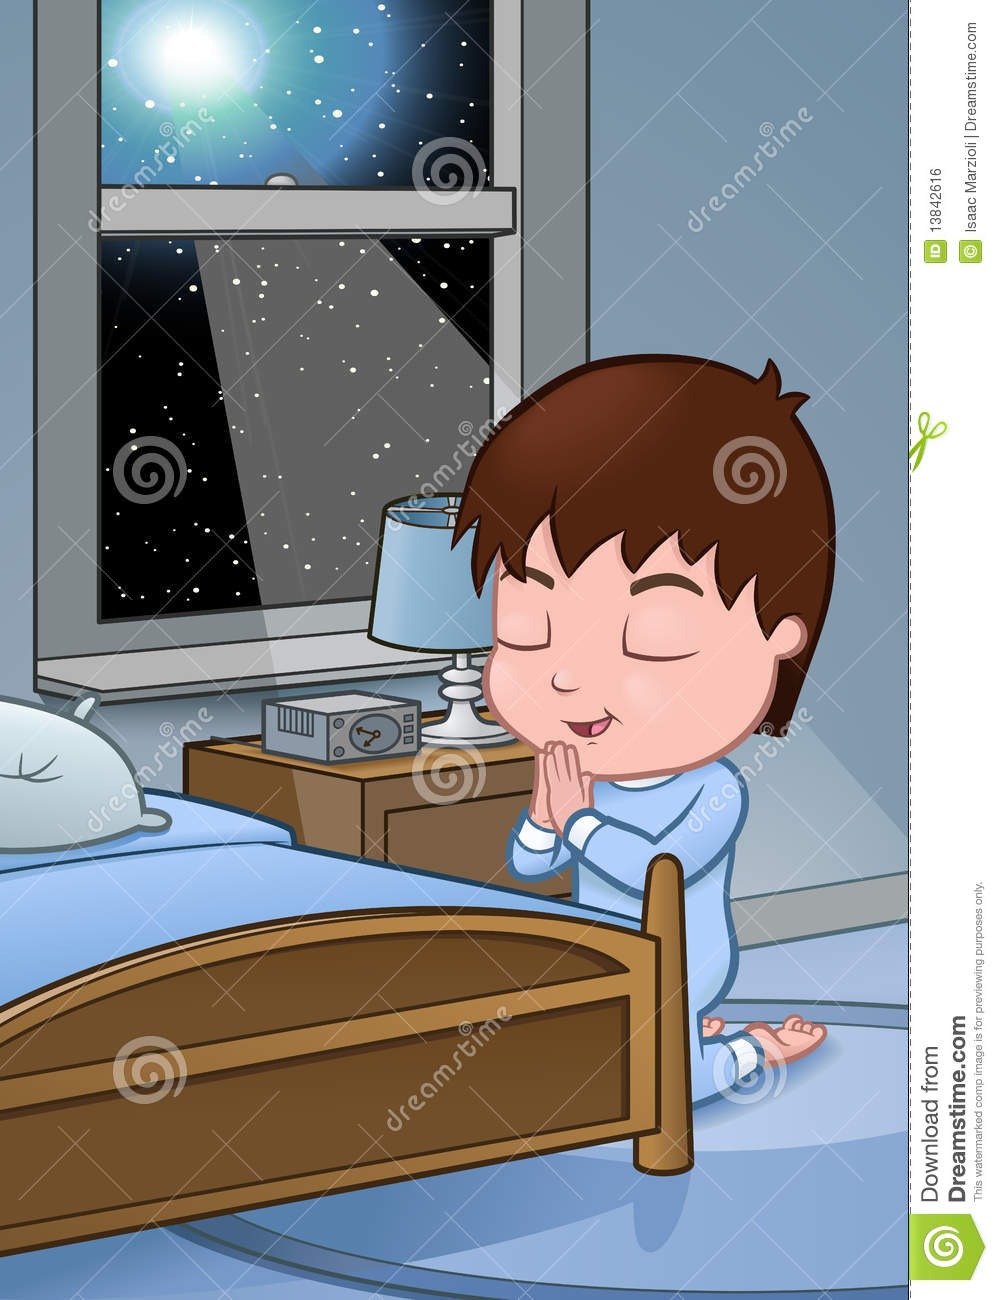 Bedtime clipart bed time. Prayer clipartuse